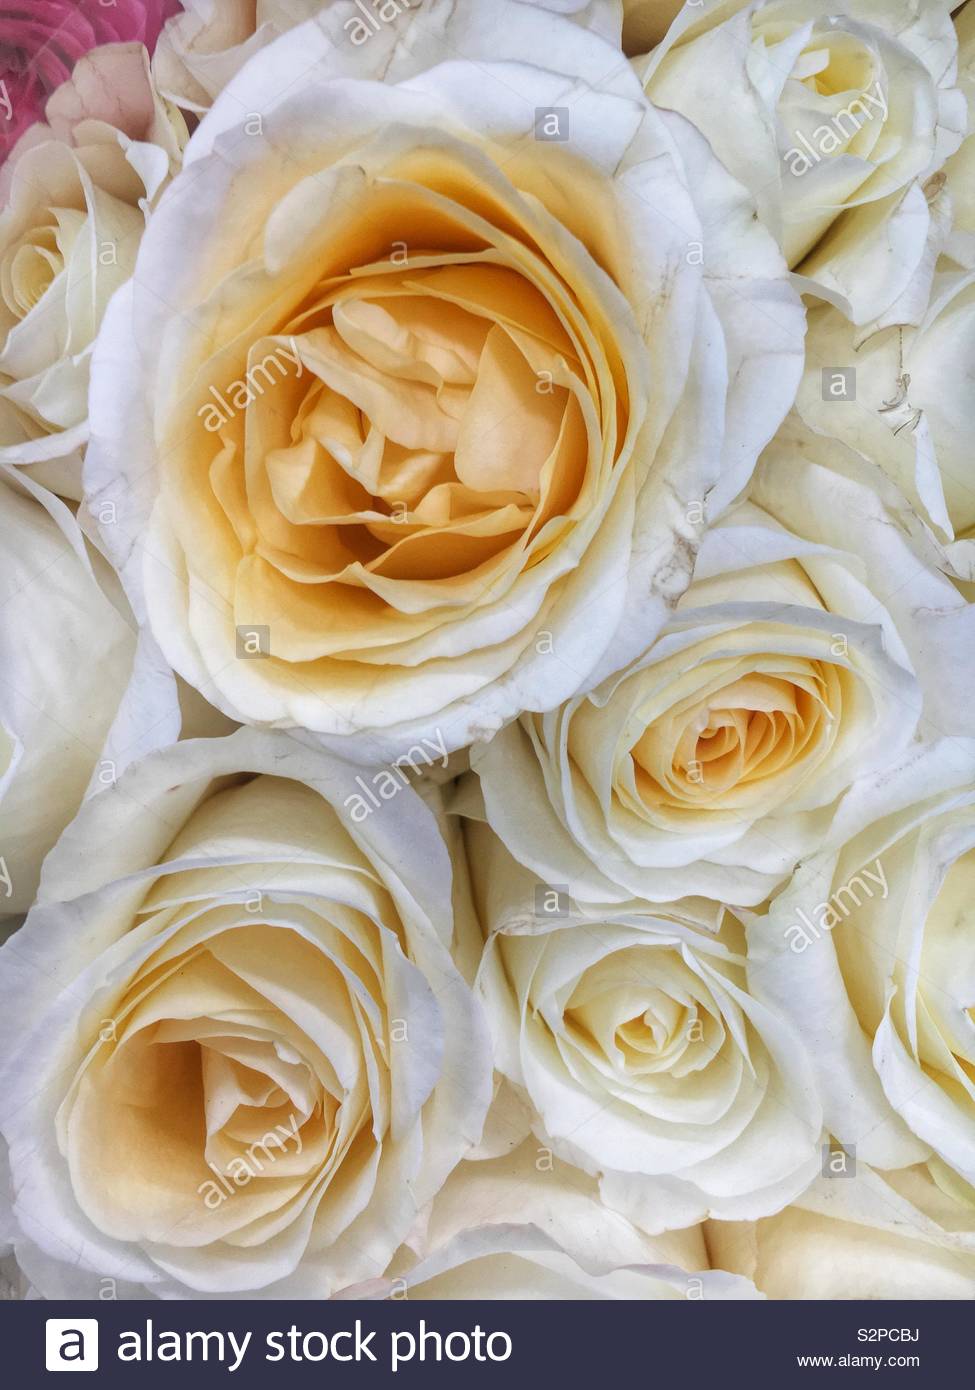 Bouquet of fresh white roses in full bloom. Stock Photo